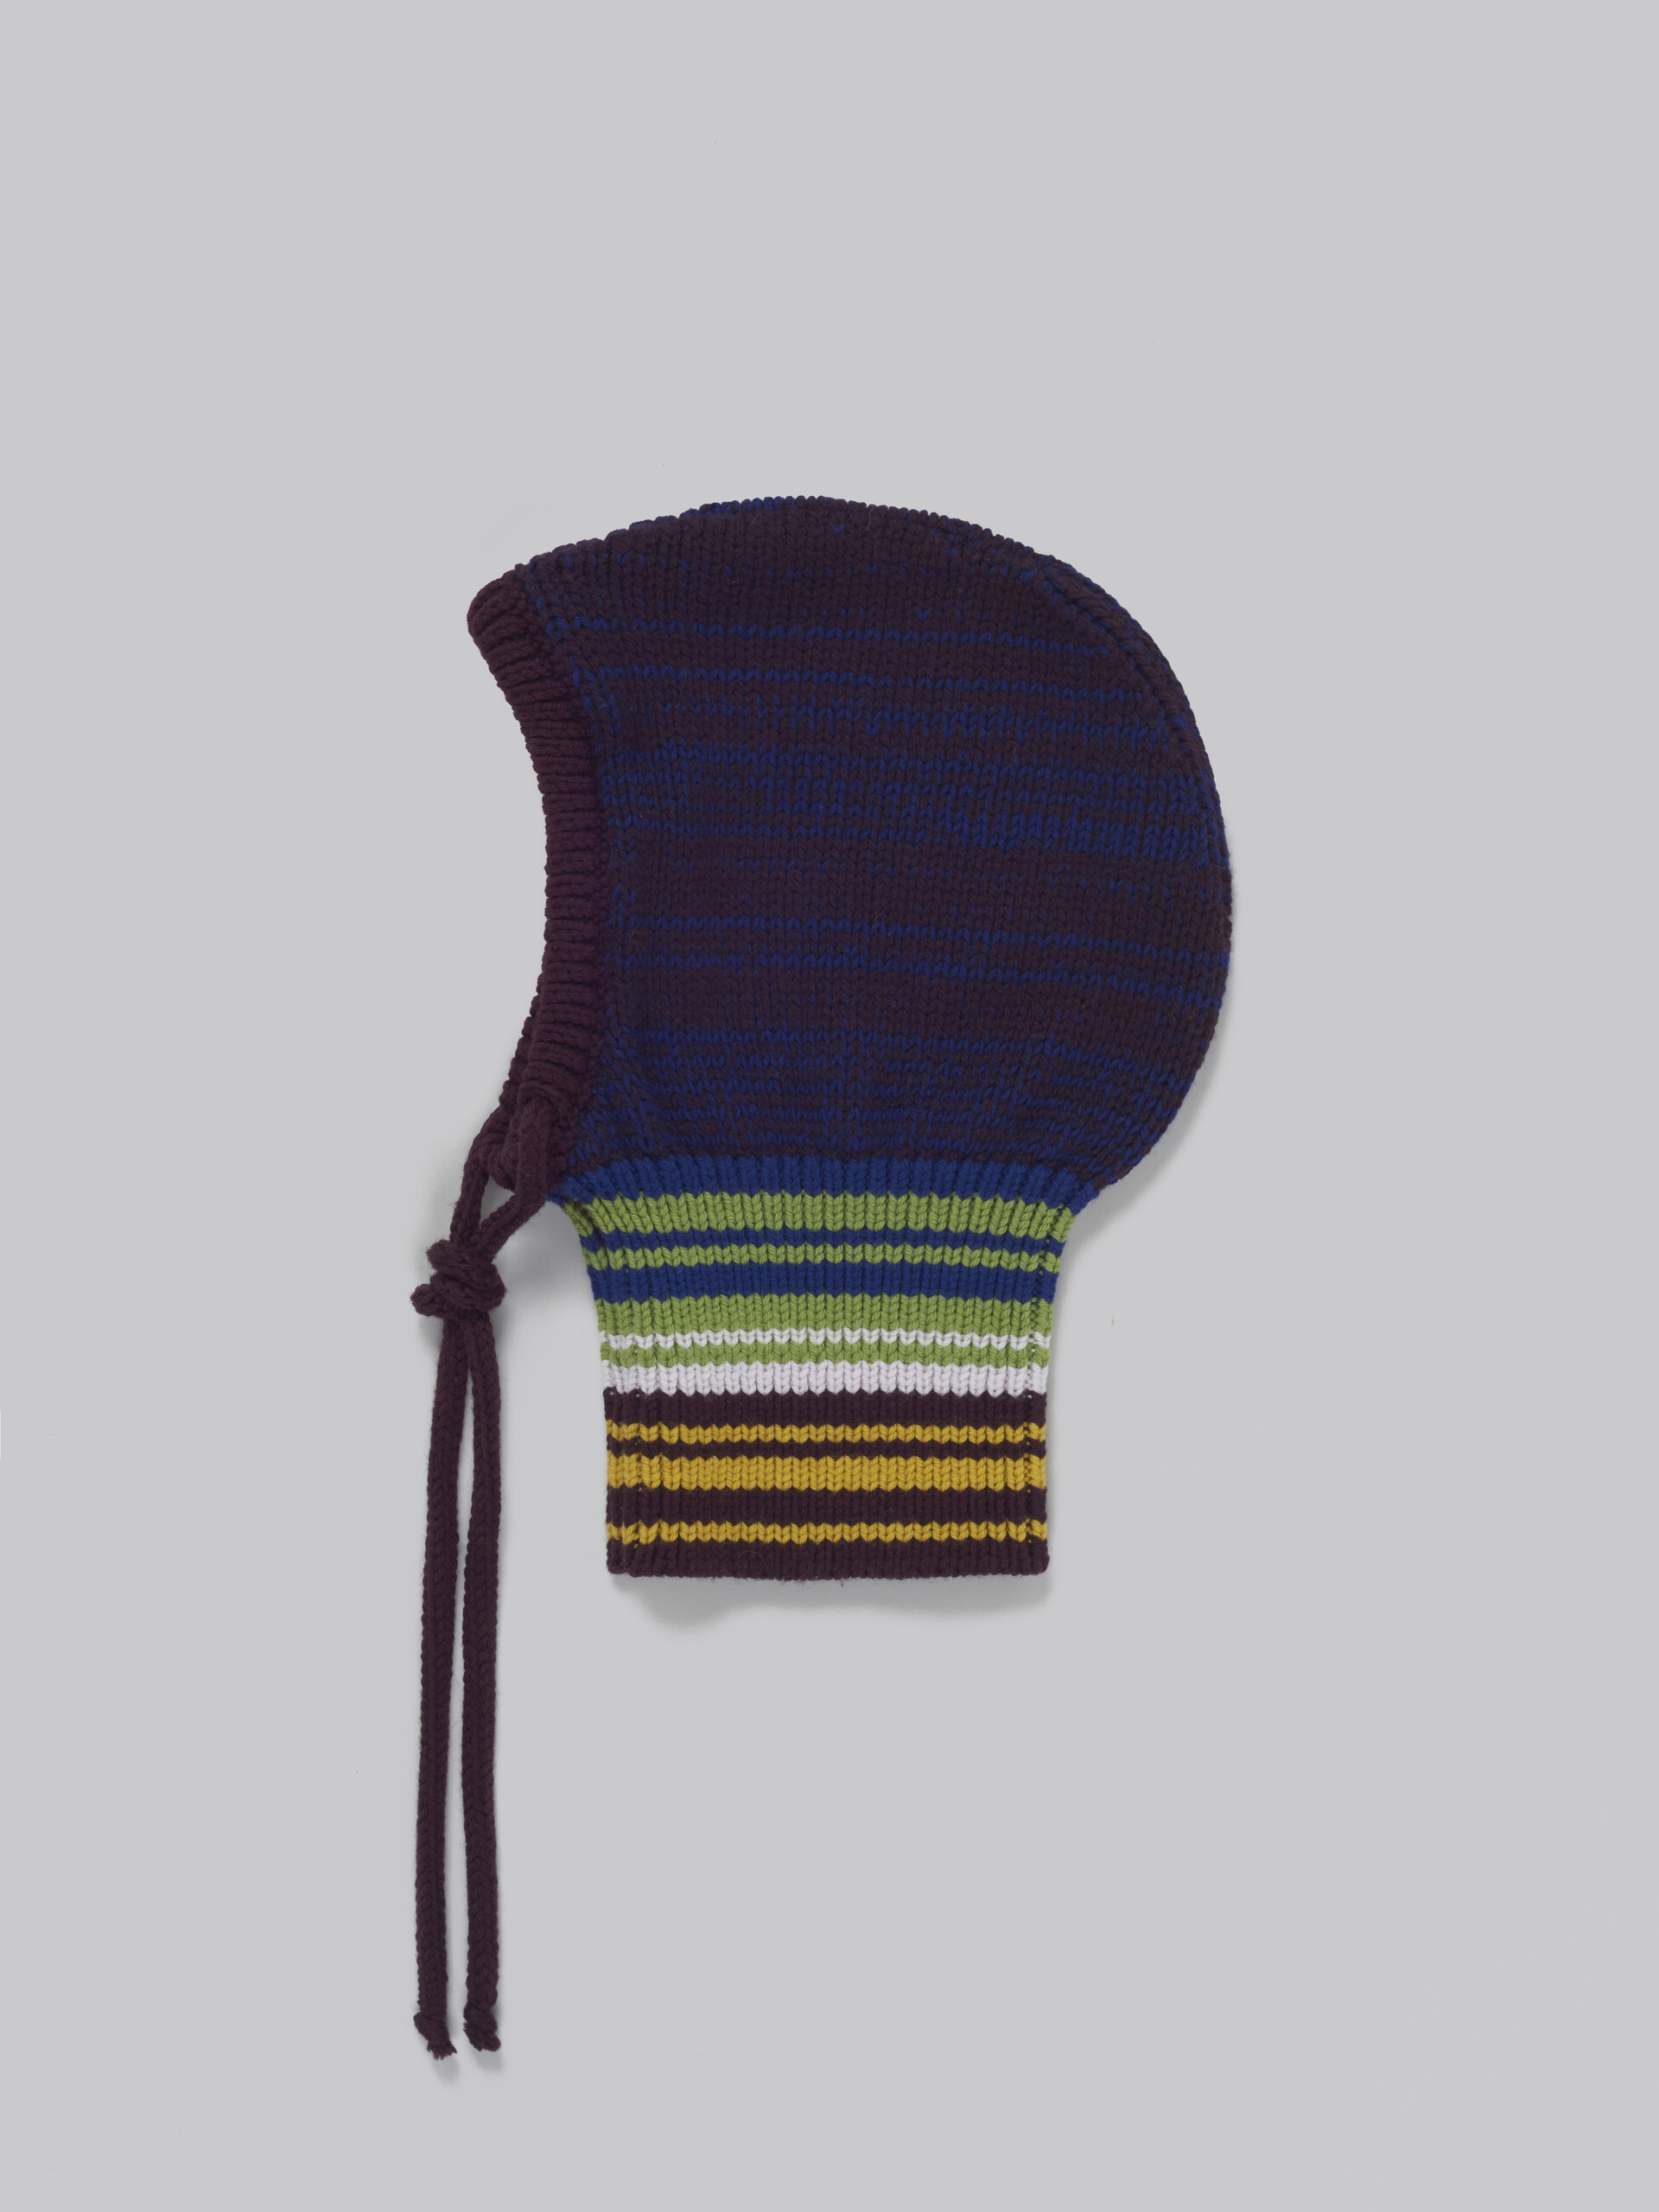 Blue mouliné balaclava with striped neck - Other accessories - Image 3